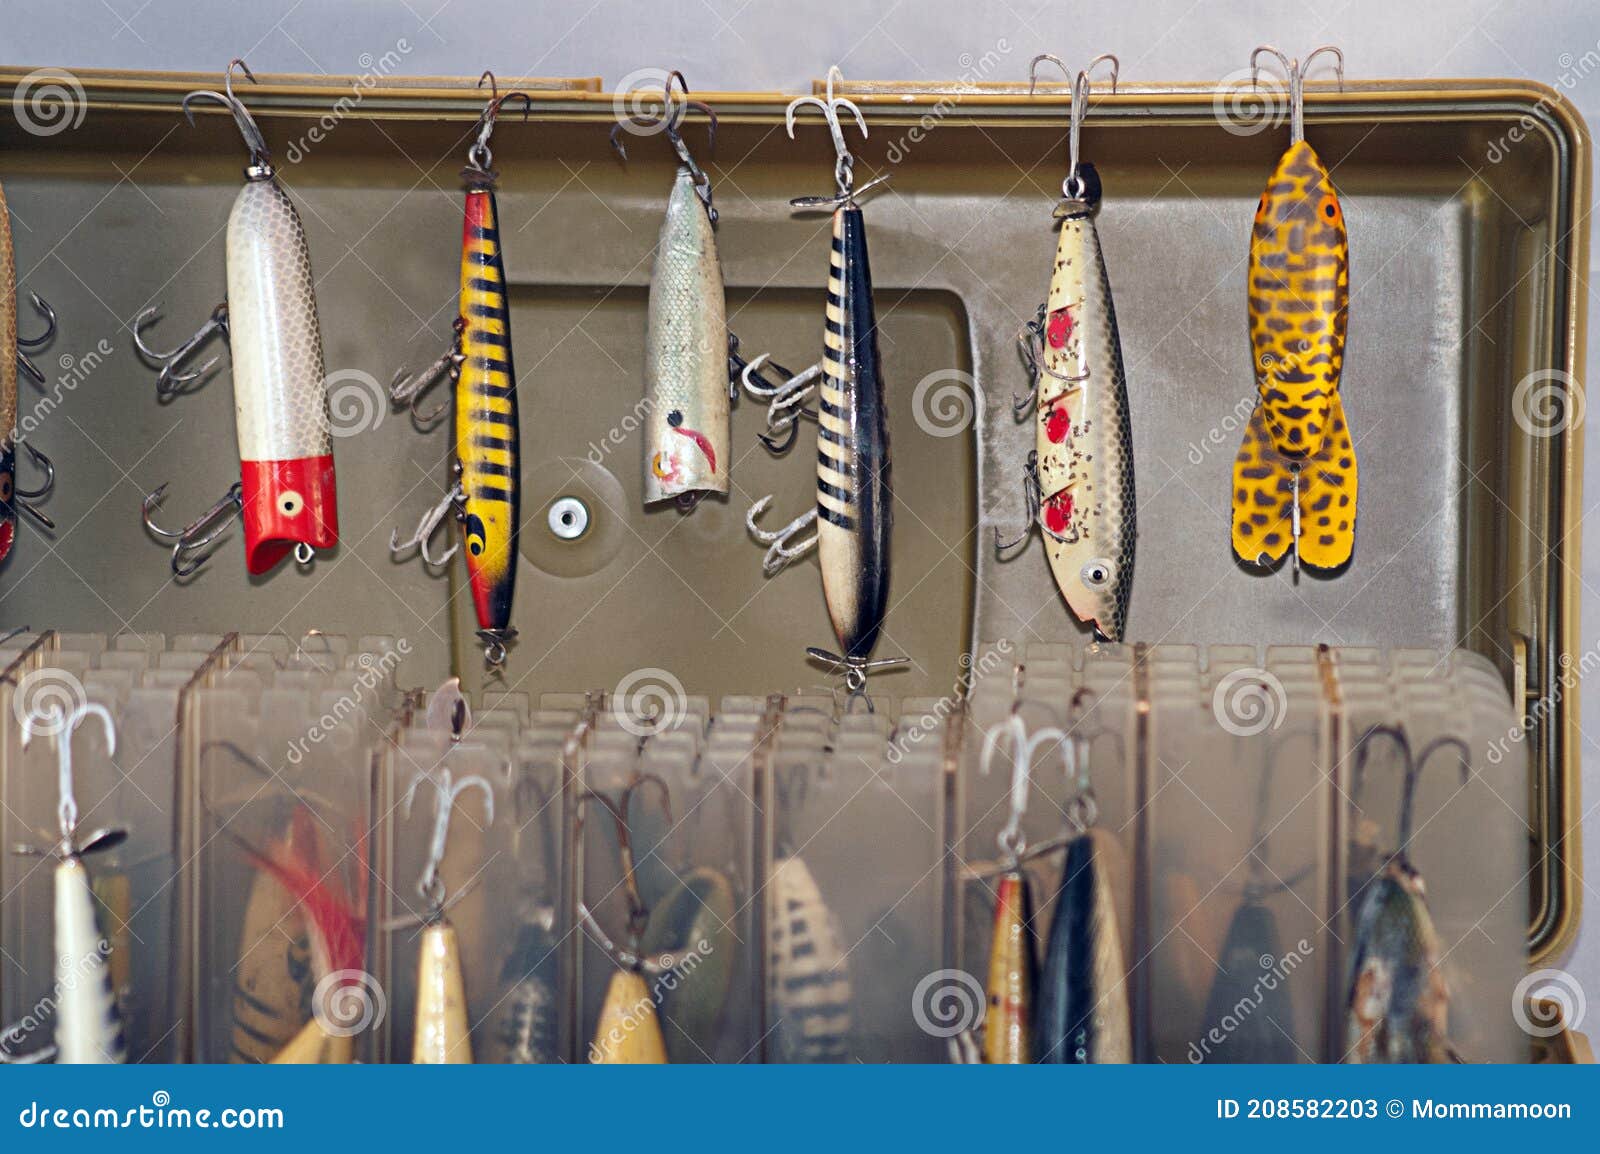 Rare Collection of Old Fishing Lures Hanging on Tacklebox Stock Image -  Image of sport, spinning: 208582203